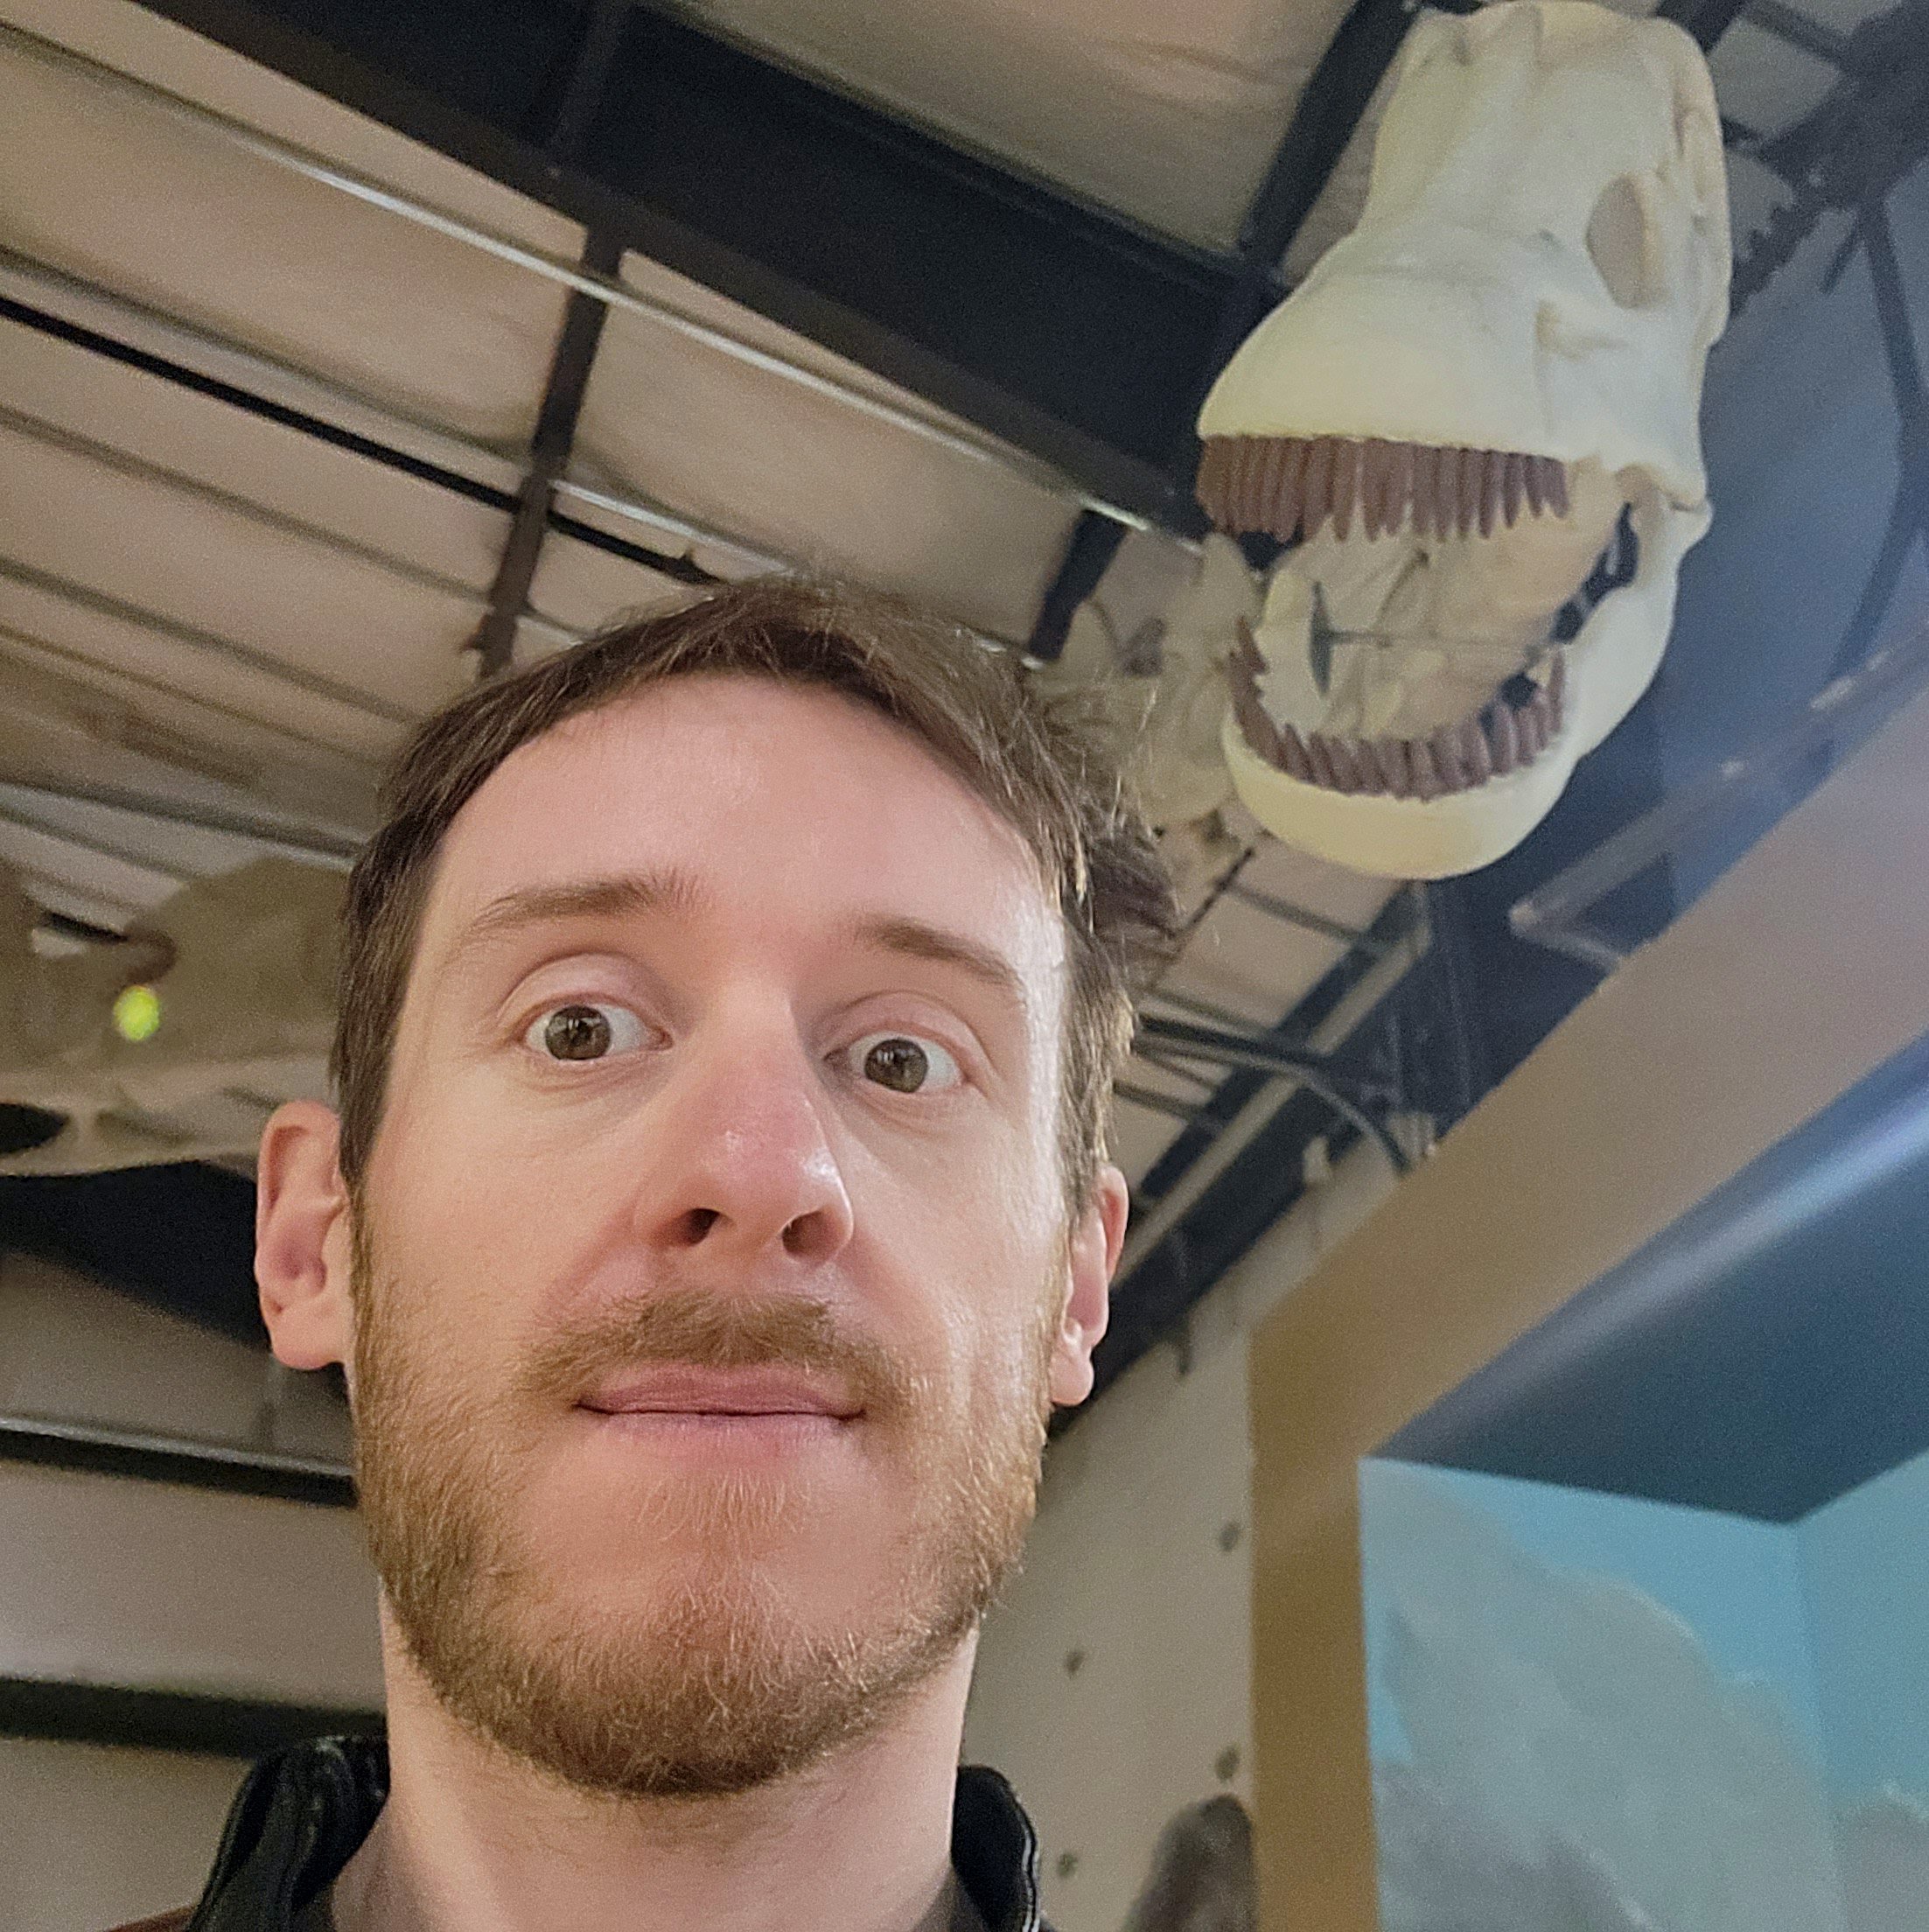 The head of this giant Seismosaur skeleton greets you when you walk inside.